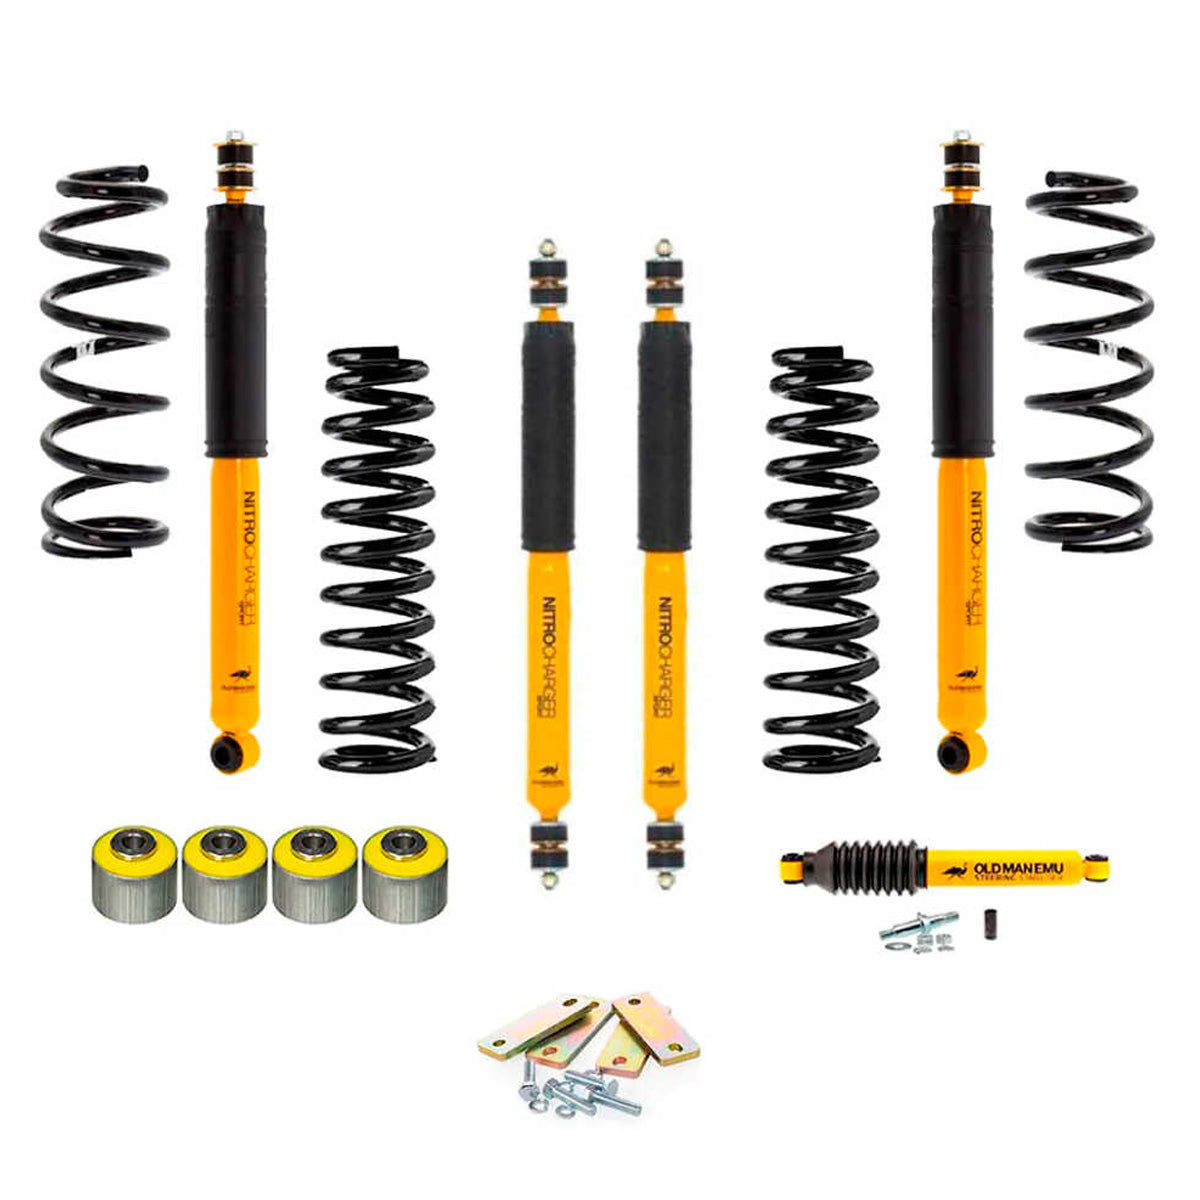 A suspension system with the OME 2 inch Lift Kit for LandCruiser 80 & 105 Series (90-07) by Old Man Emu to enhance ground clearance for the Jeep Wrangler.